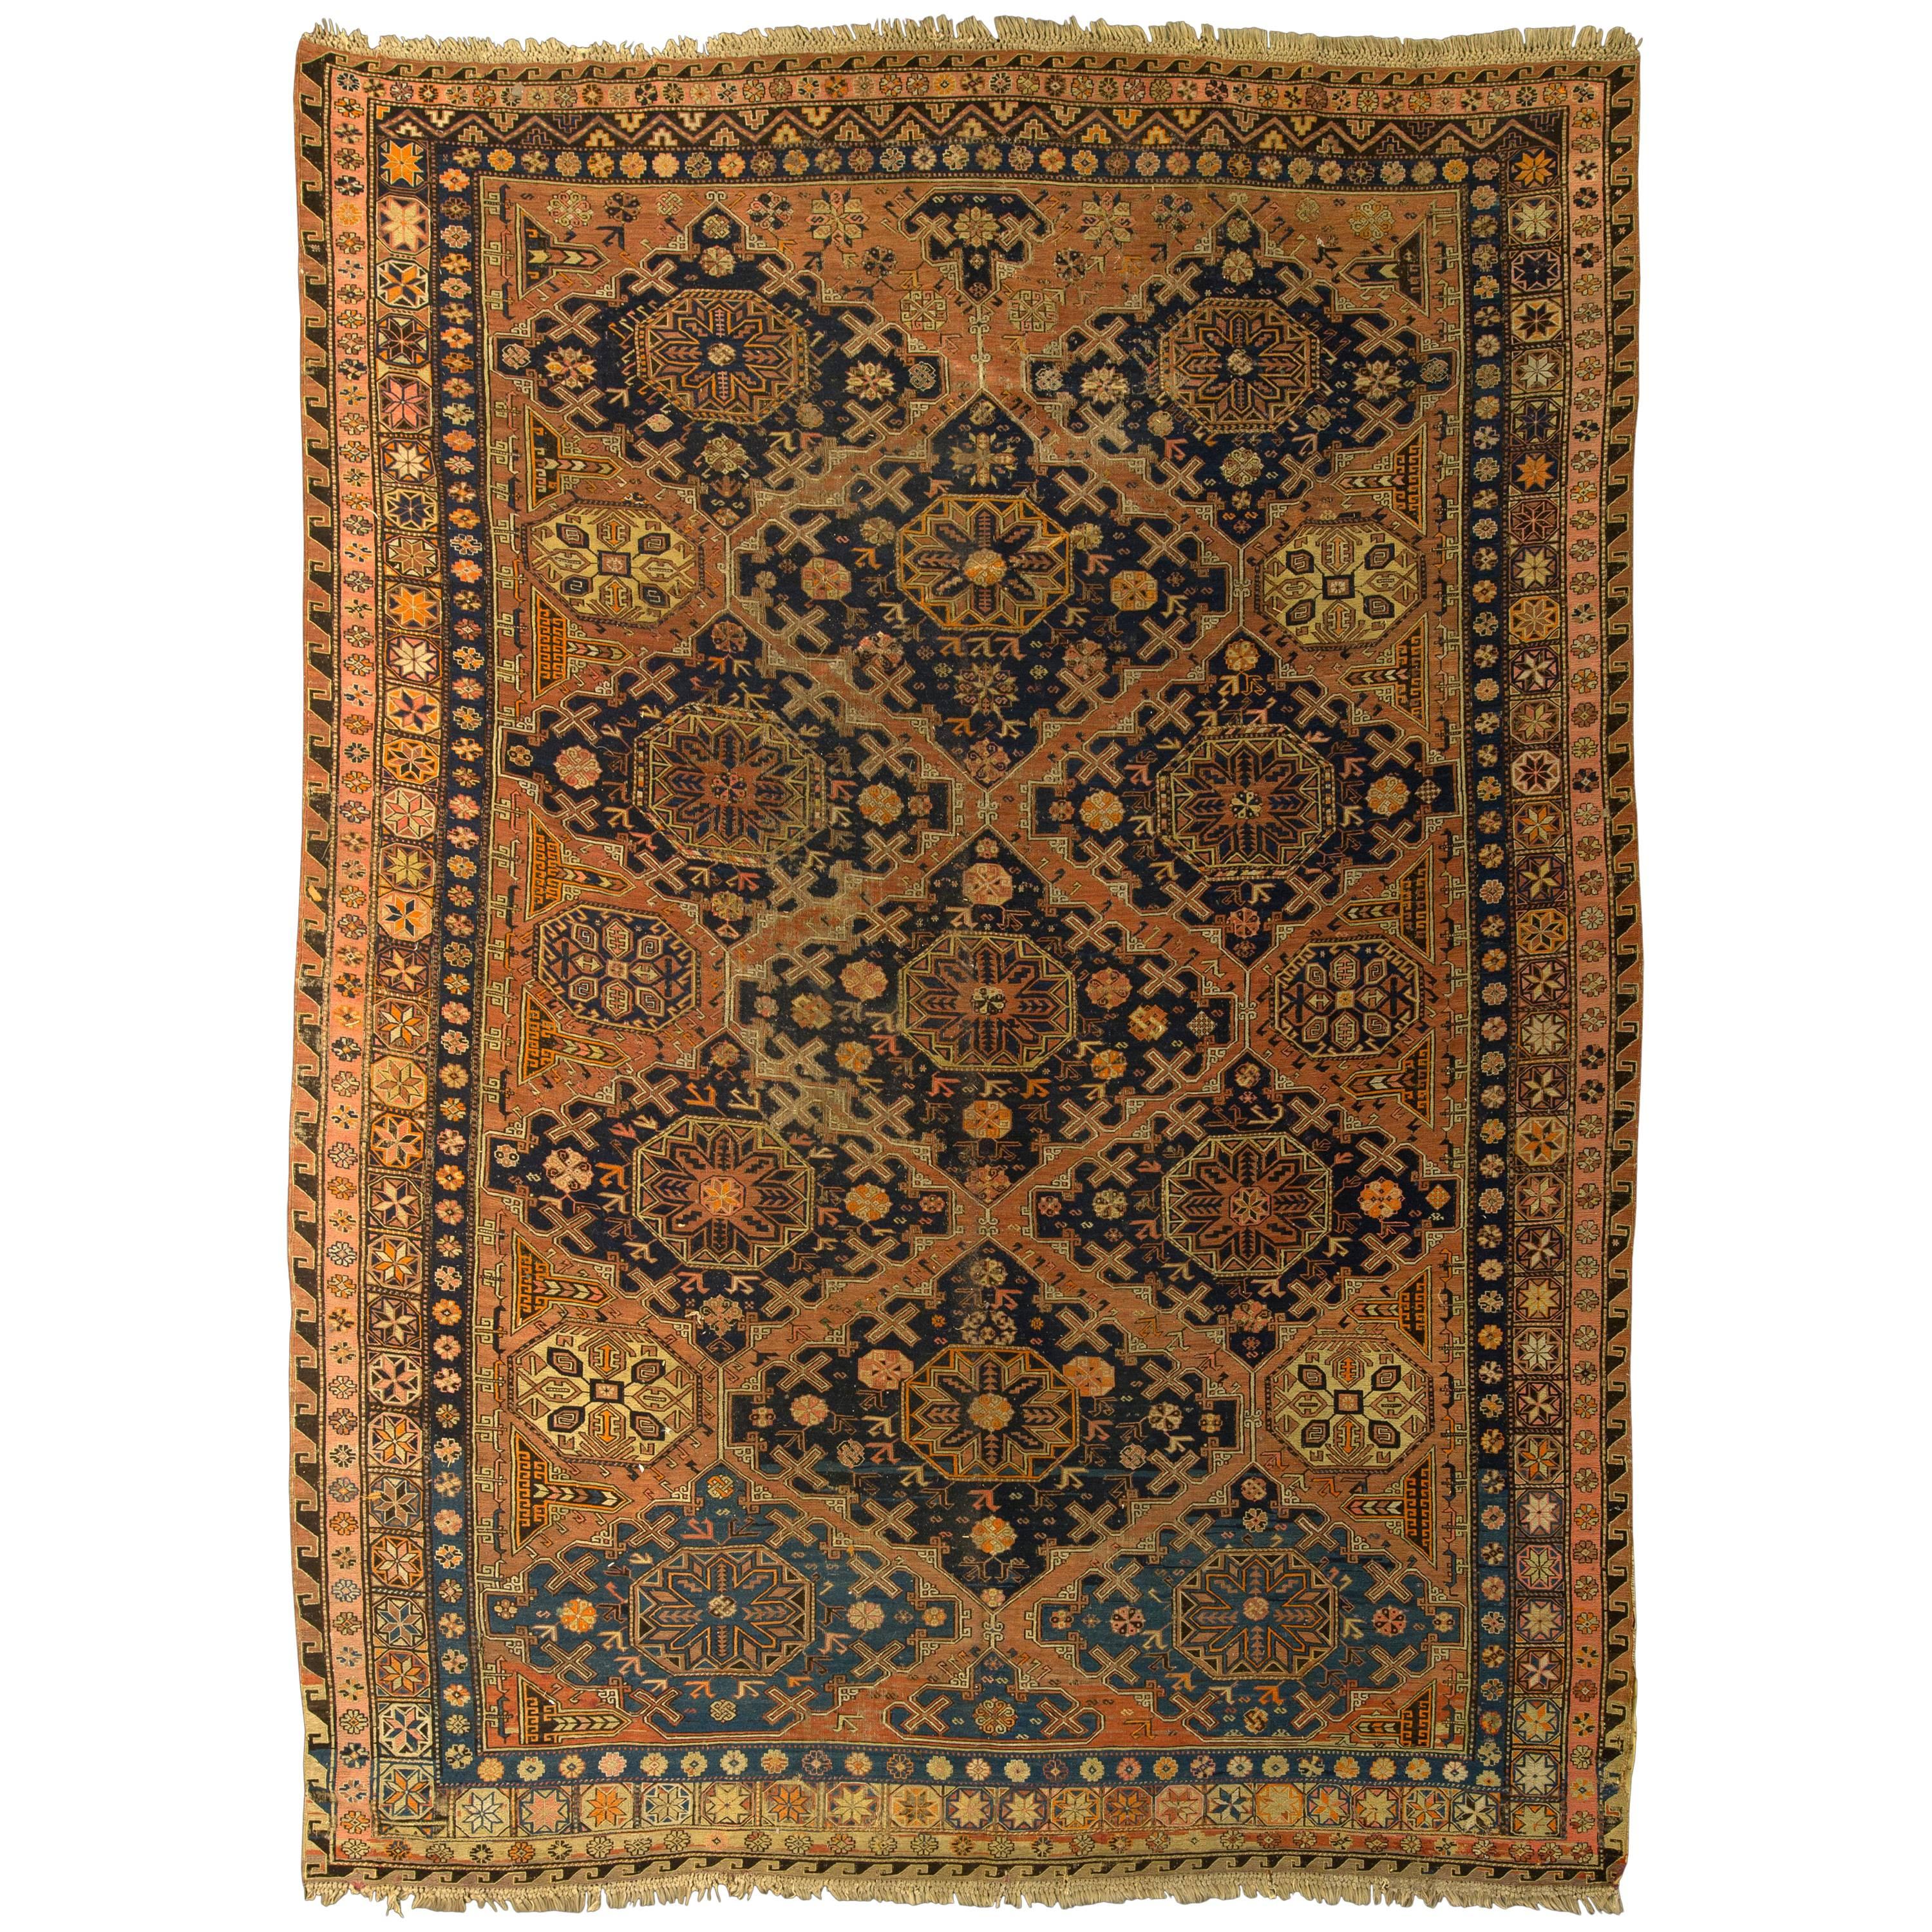 Antique and Unusual Soumak Rug For Sale